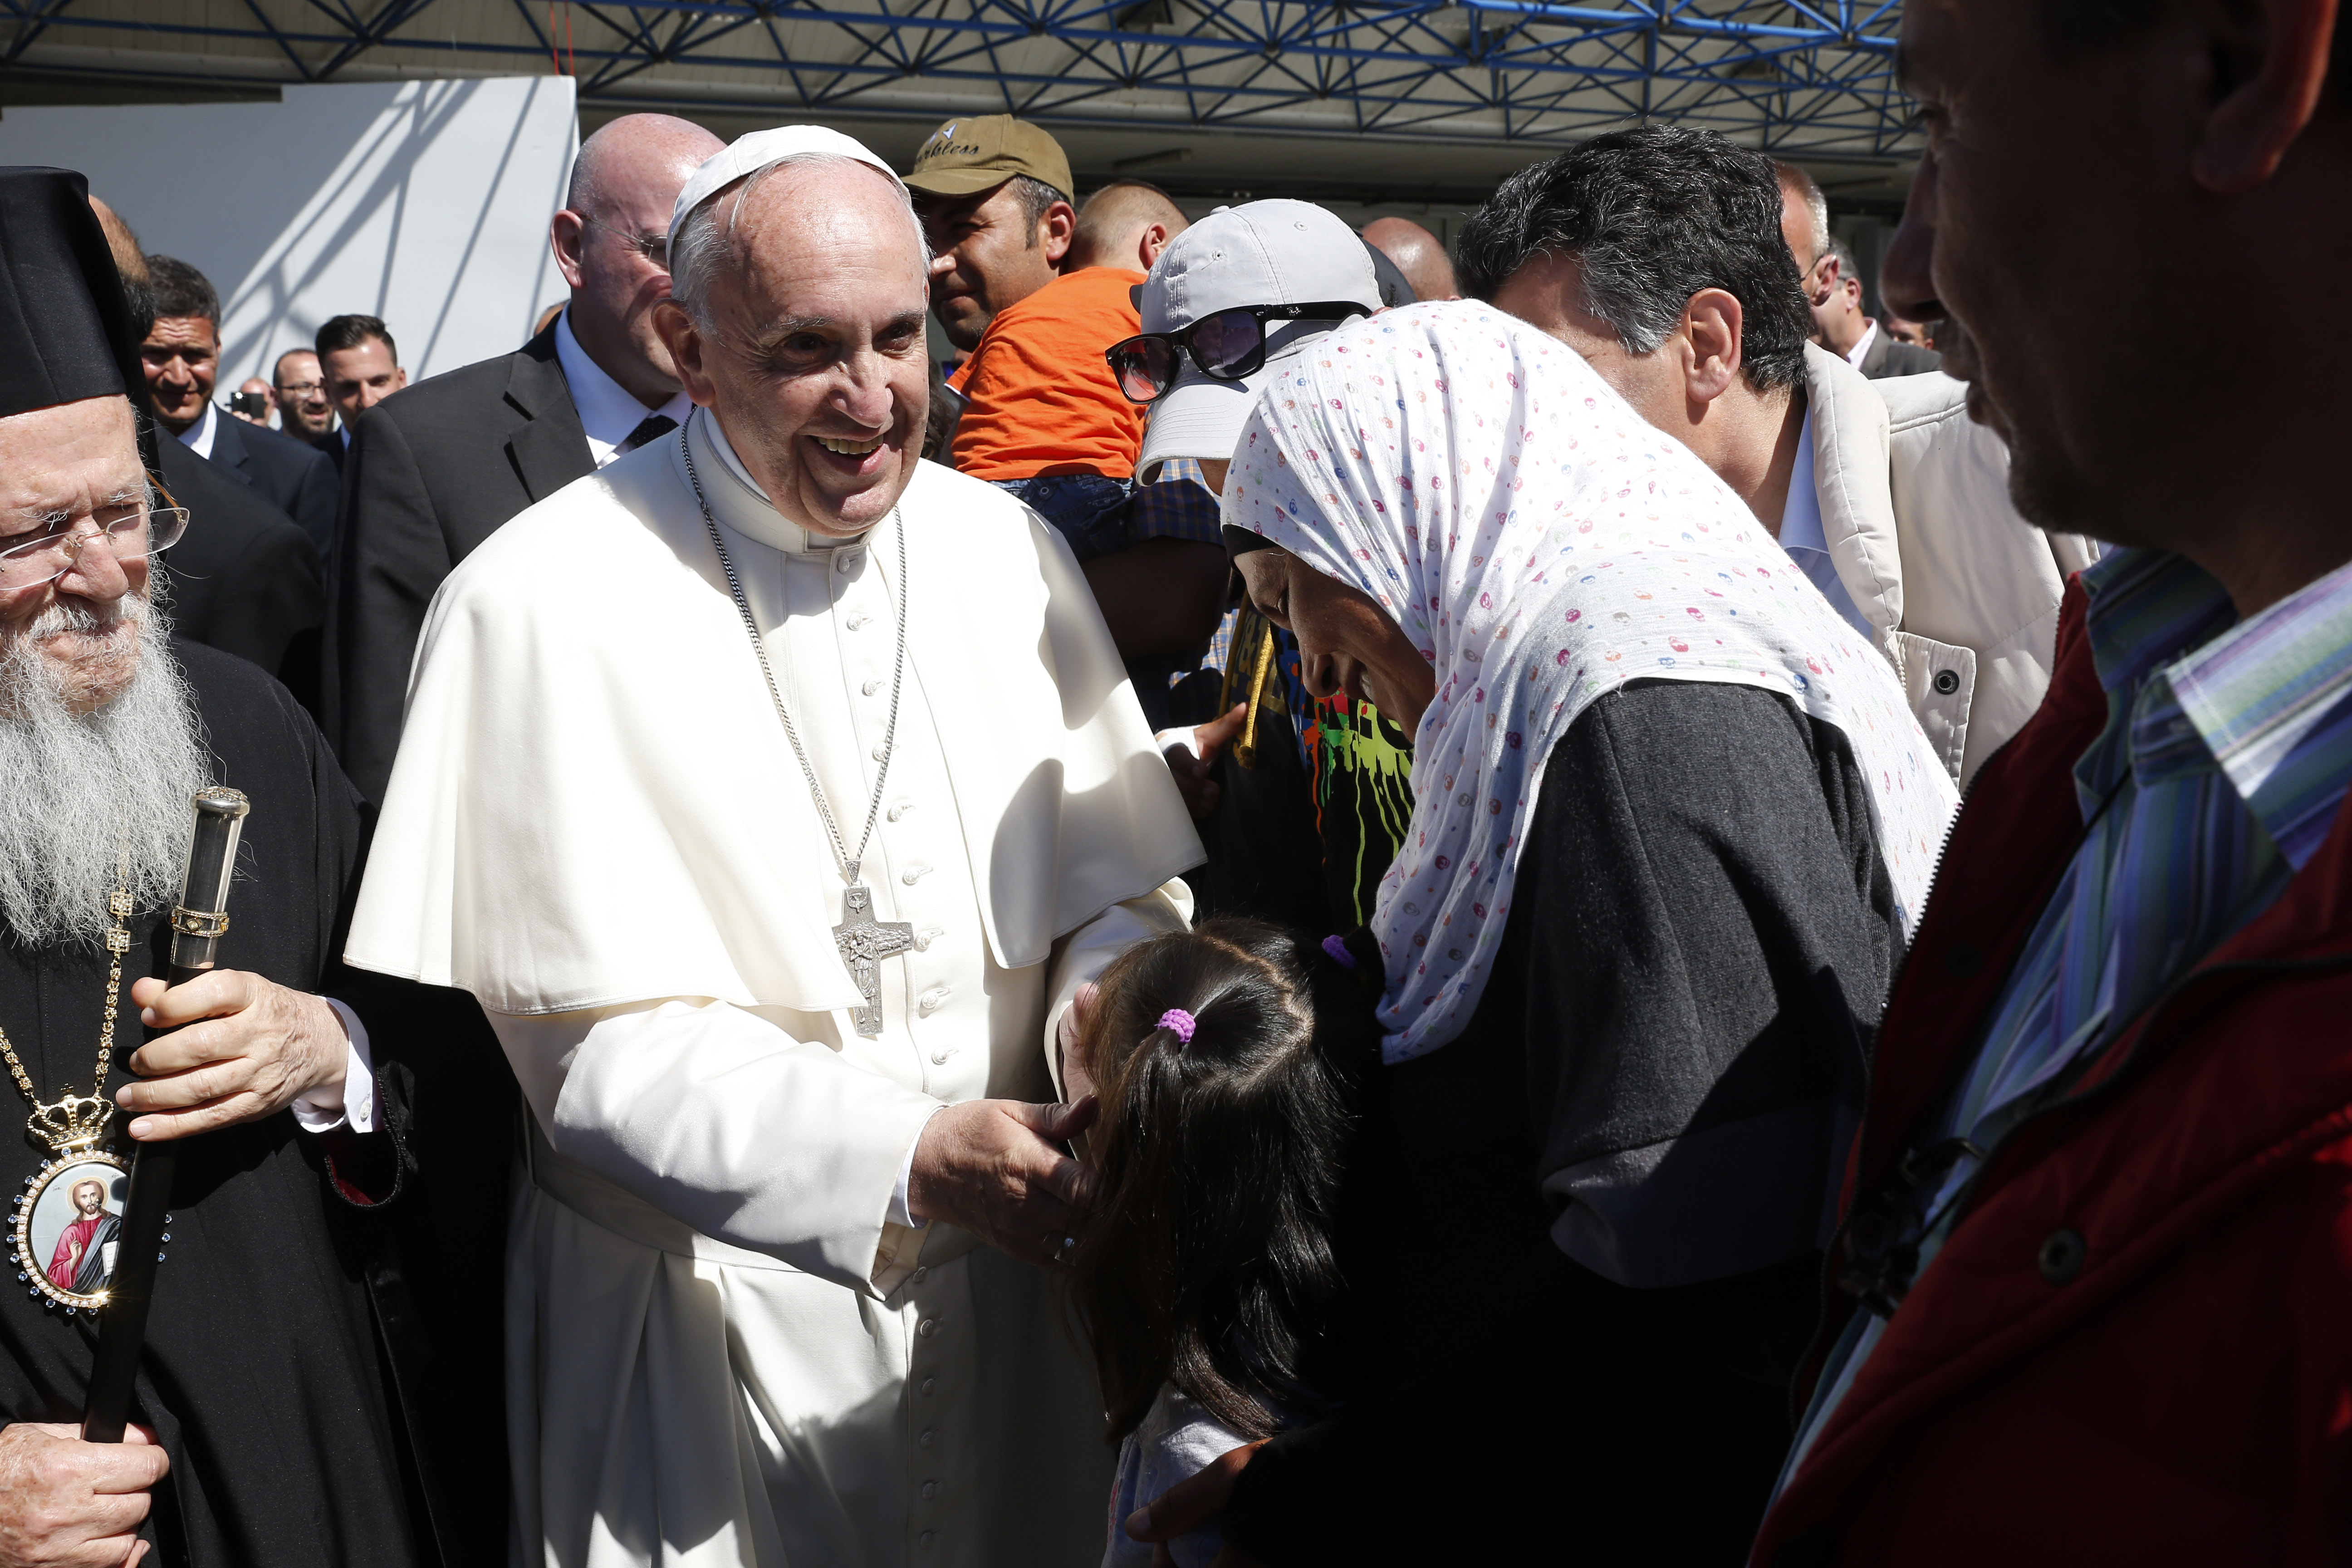 Pope Francis greets refugees who are traveling to Rome with him at the international airport in Mytilene on the island of Lesbos, Greece, April 16, 2016. The pope brought 12 refugees to Italy on his plane. (CNS/Paul Haring)